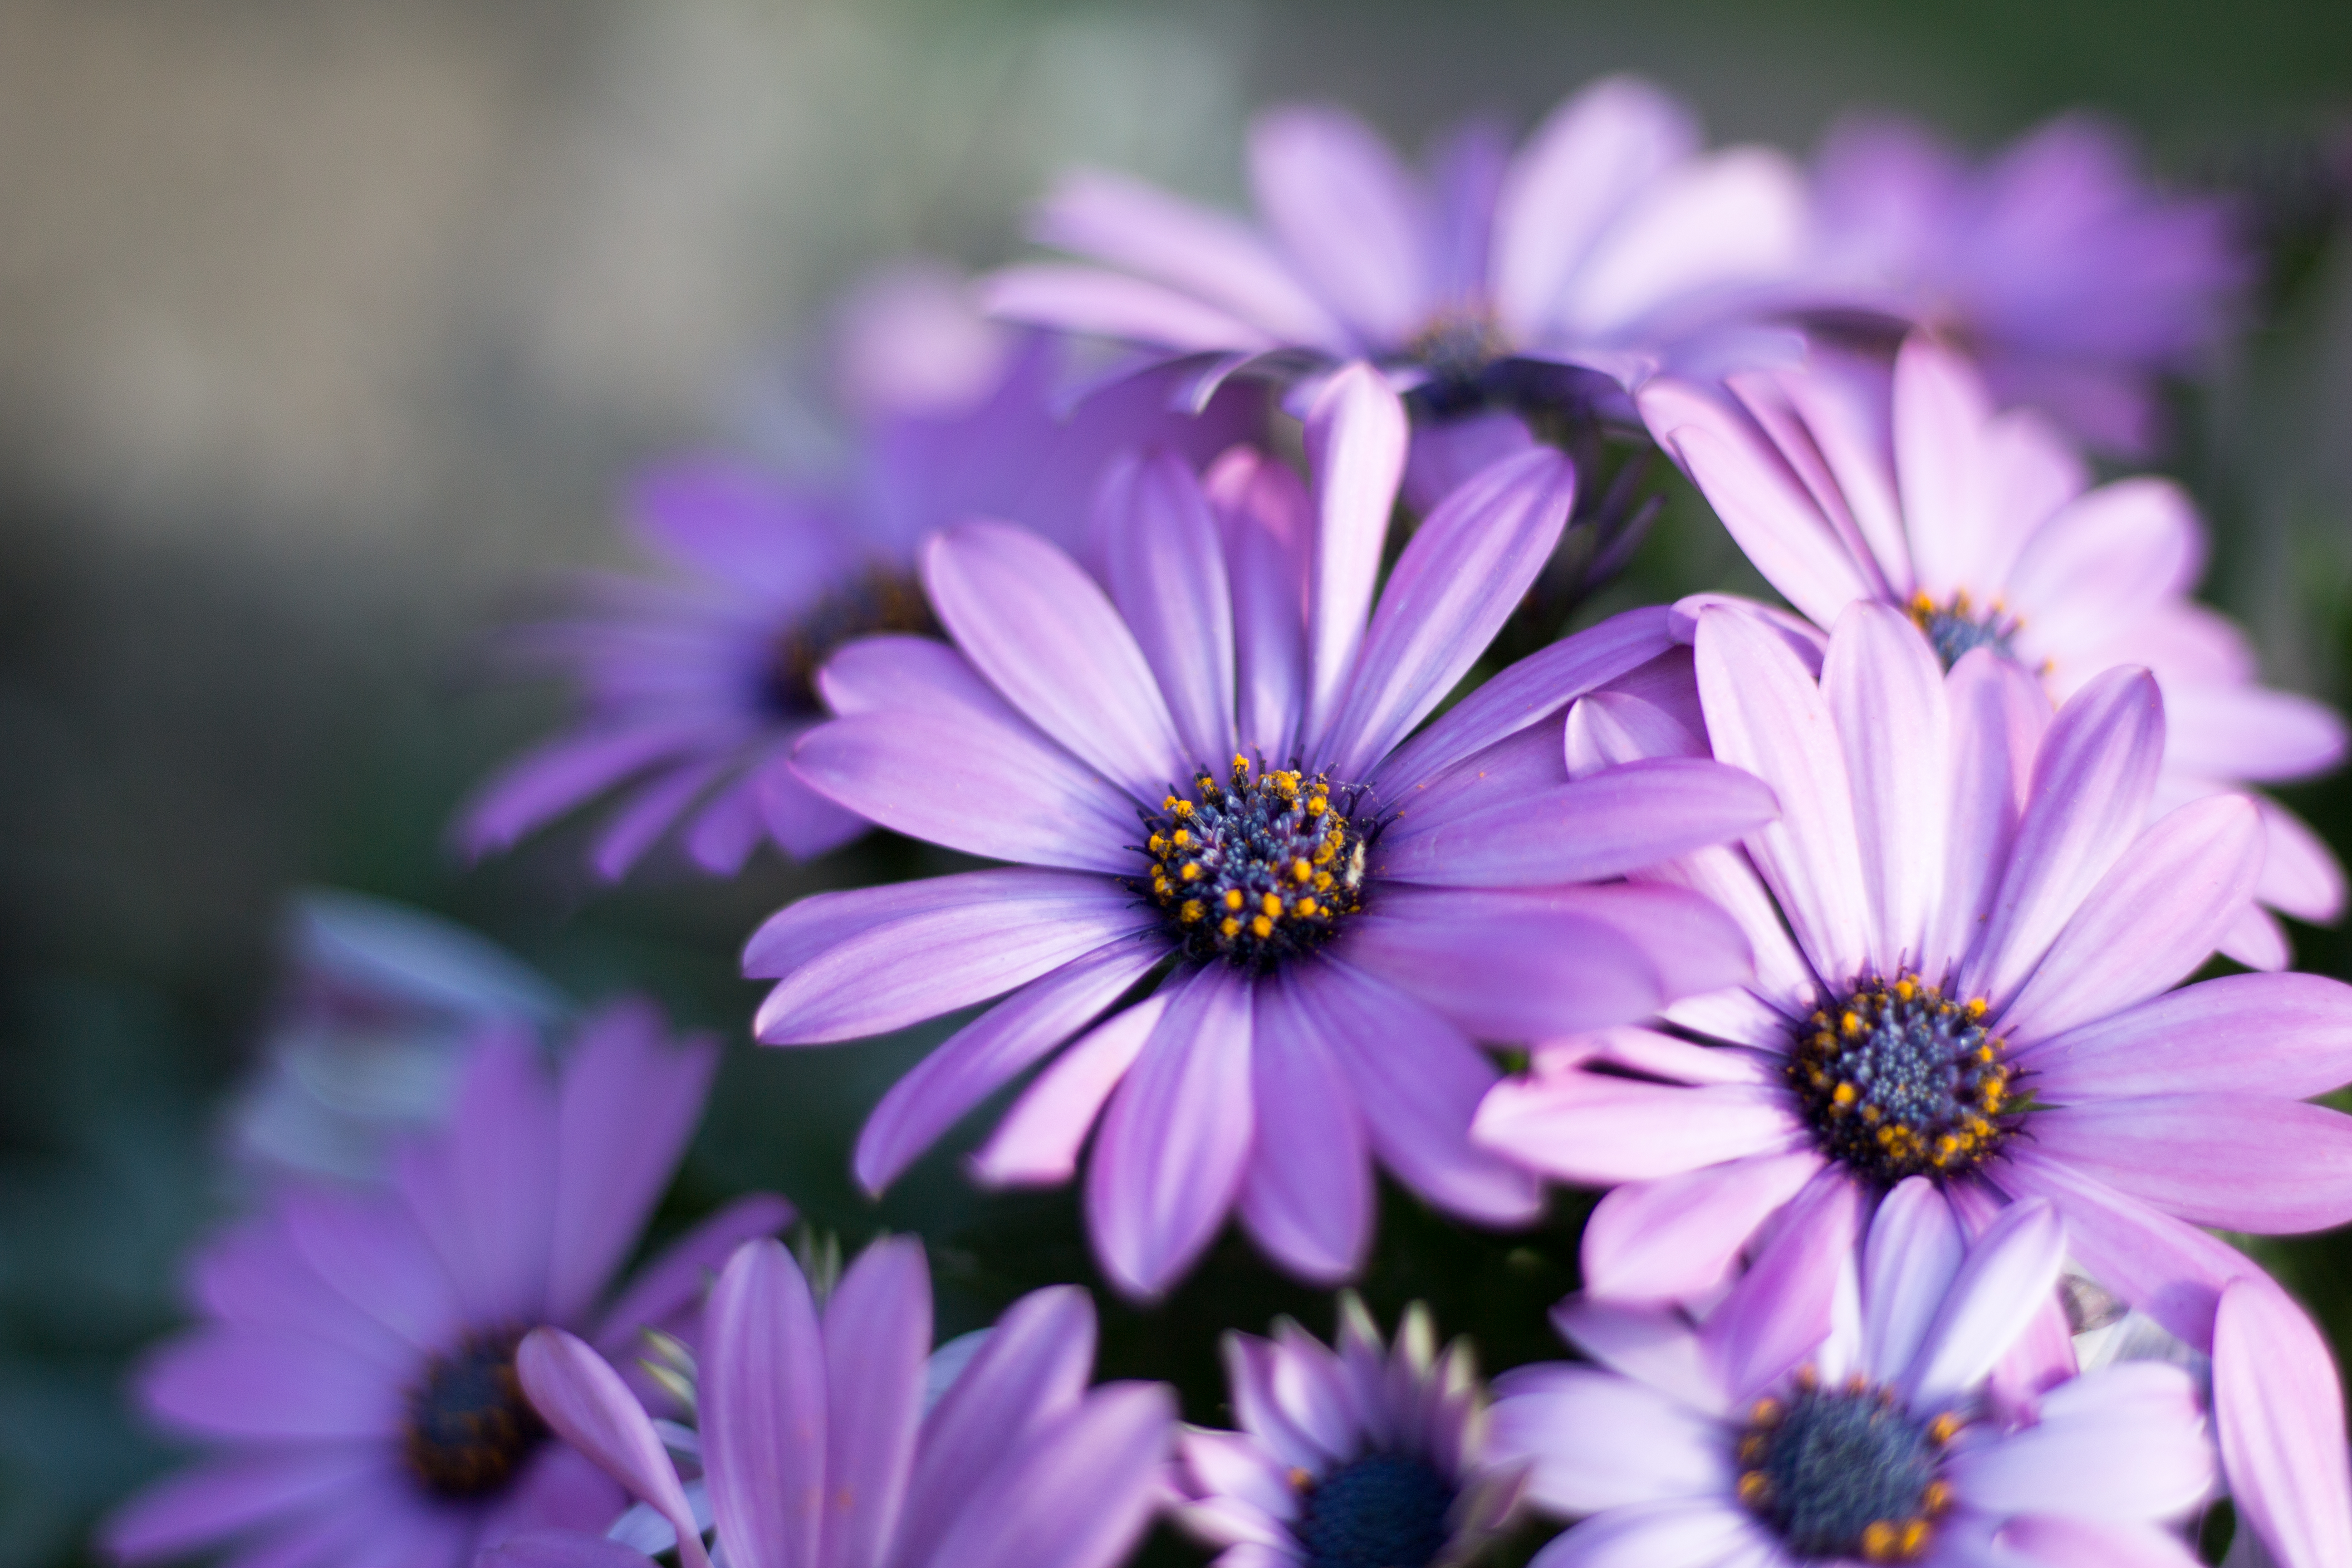 Purple flower in close-up | Free Stock Photo